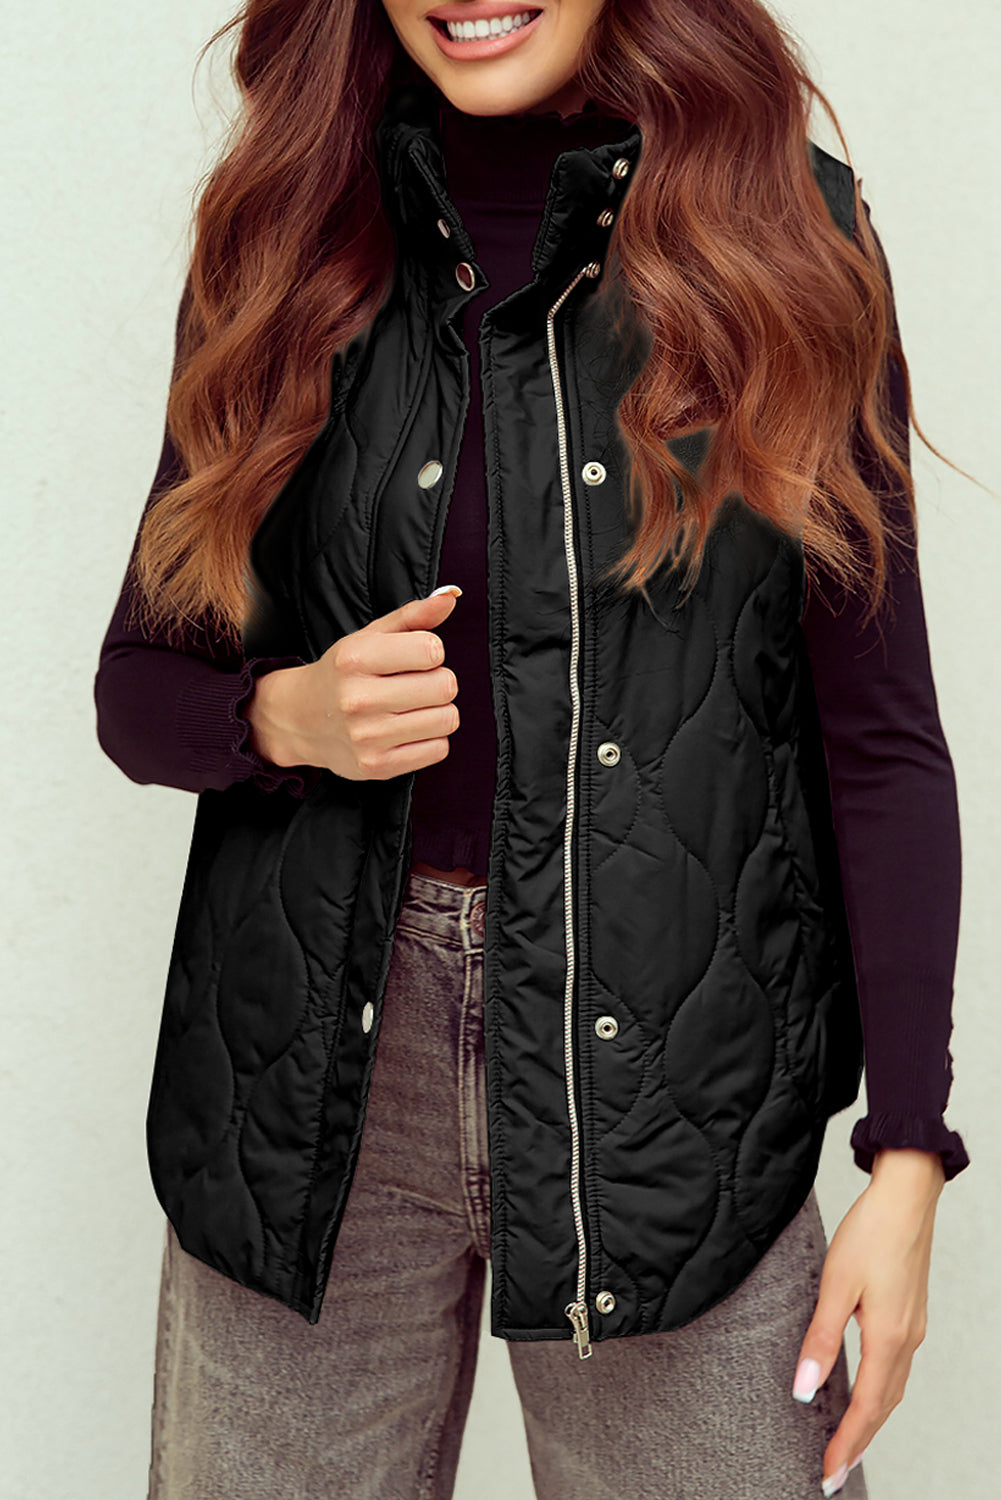 Black Textured Button Zipped Puffer Vest Jacket - Bellisima Clothing Collective